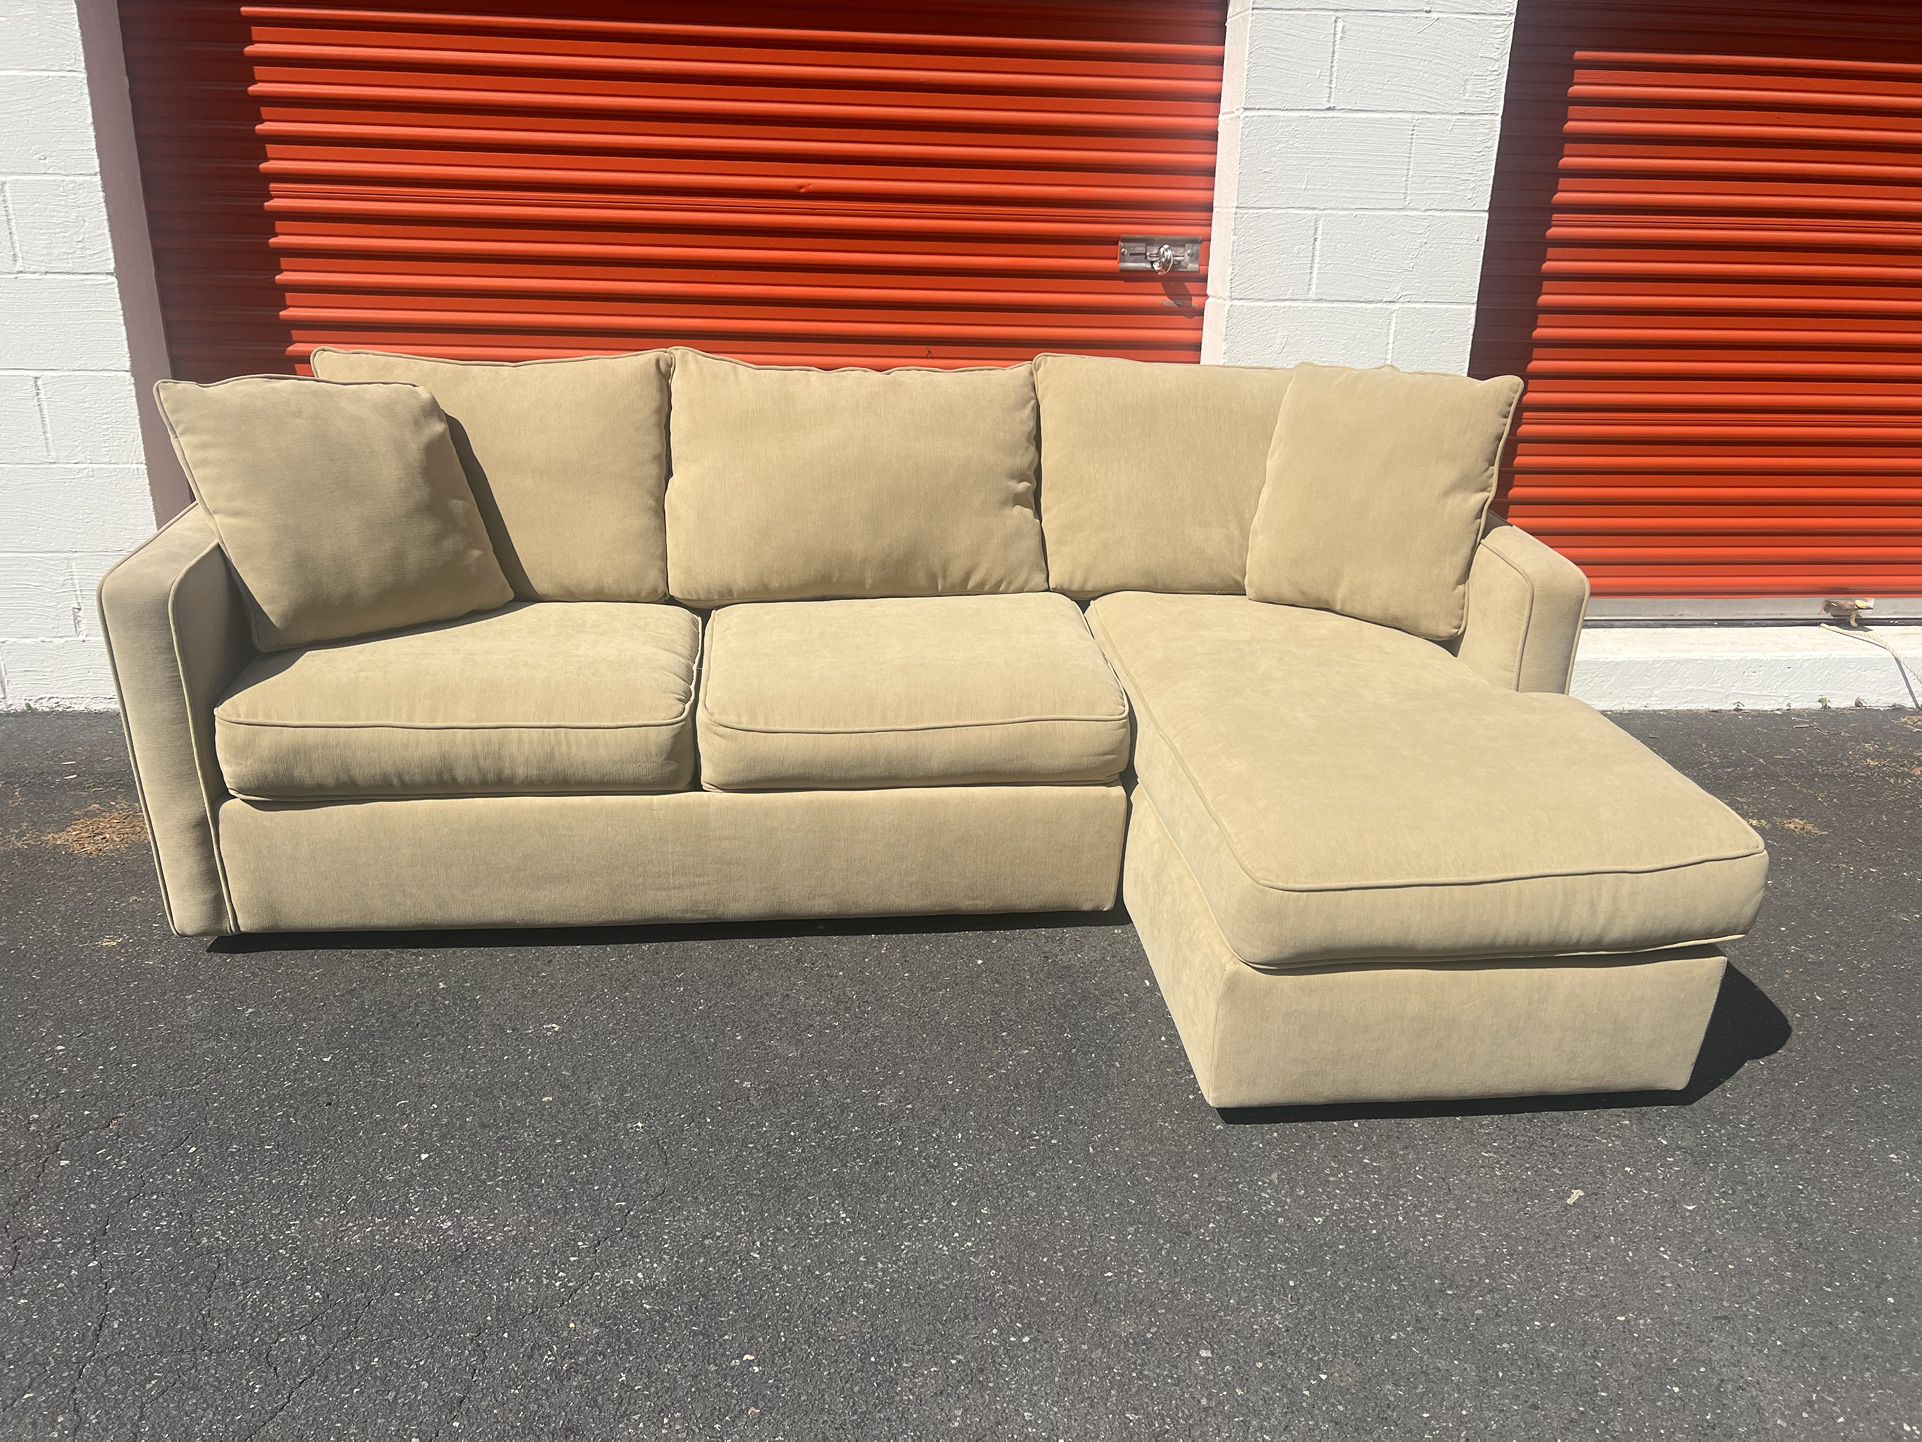 Sleeper sectional couch sofa